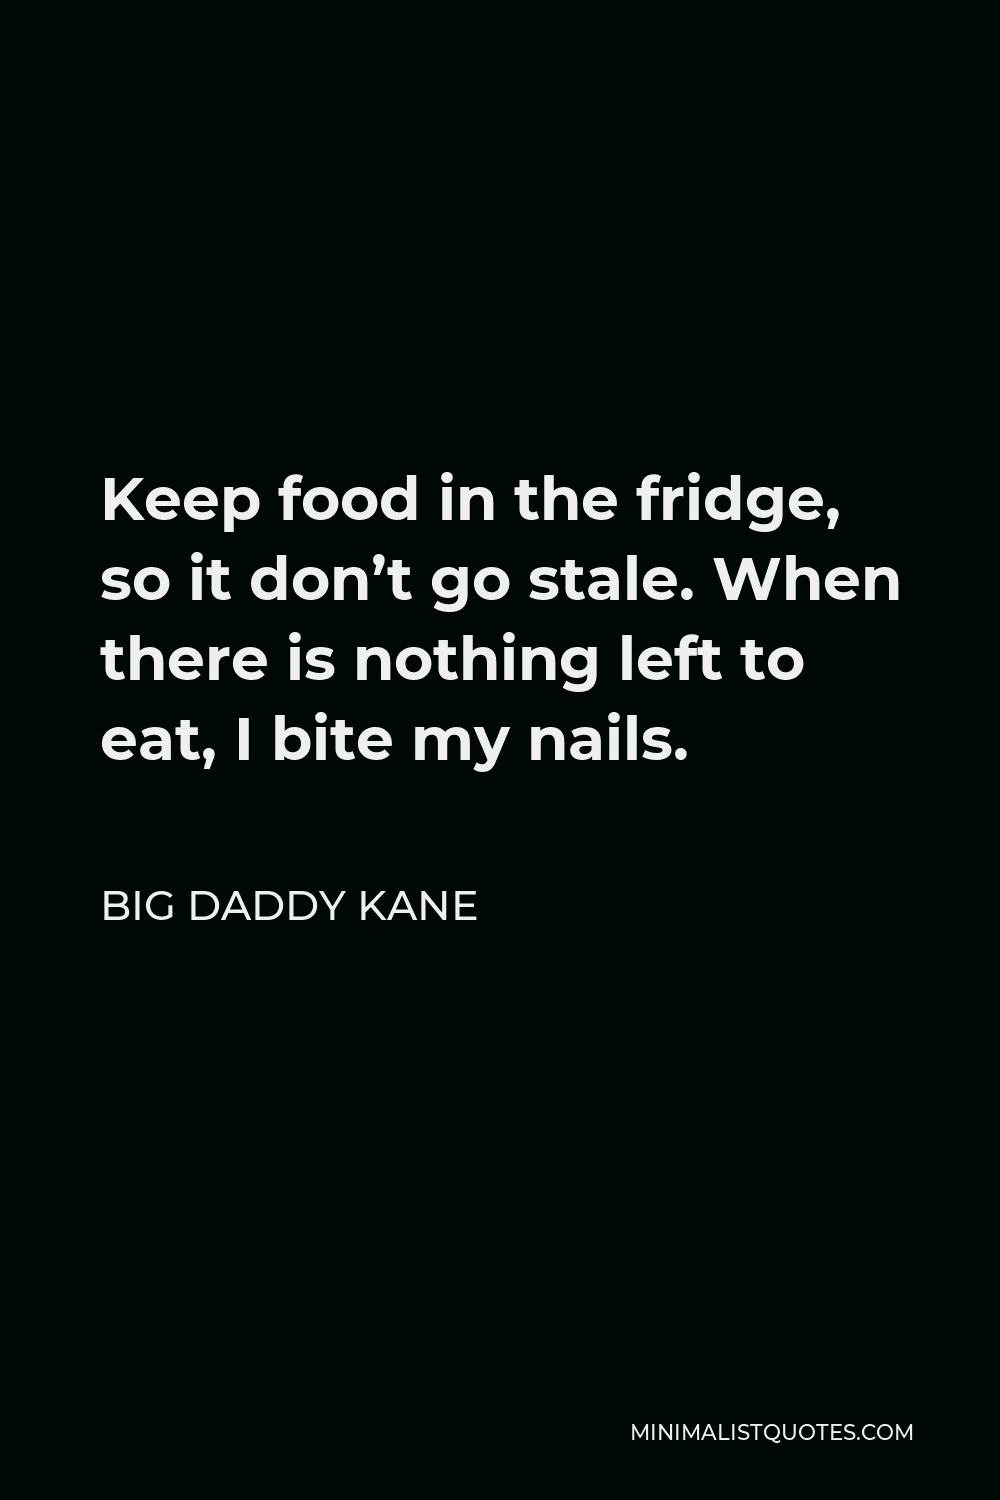 Big Daddy Kane Quote - Keep food in the fridge, so it don’t go stale. When there is nothing left to eat, I bite my nails.